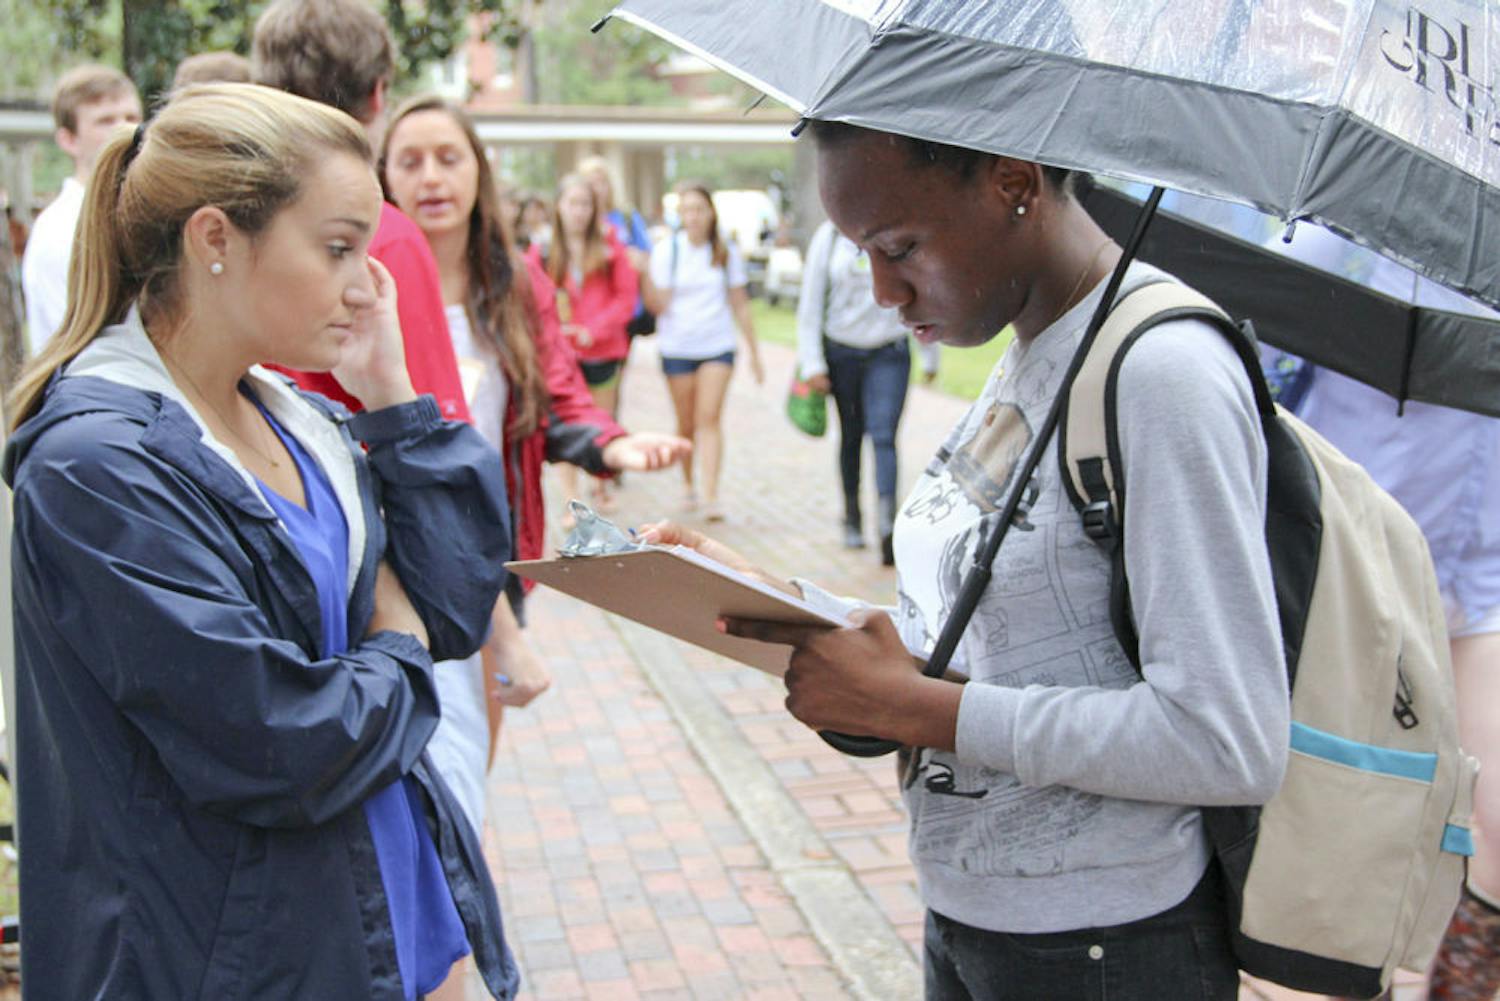 UF health science student Eunice Noel, 19, registers to vote while being assisted by Chomp the Vote Director, 21-year-old political science senior Kelly Vidal Tuesday morning on the Plaza of the Americas.